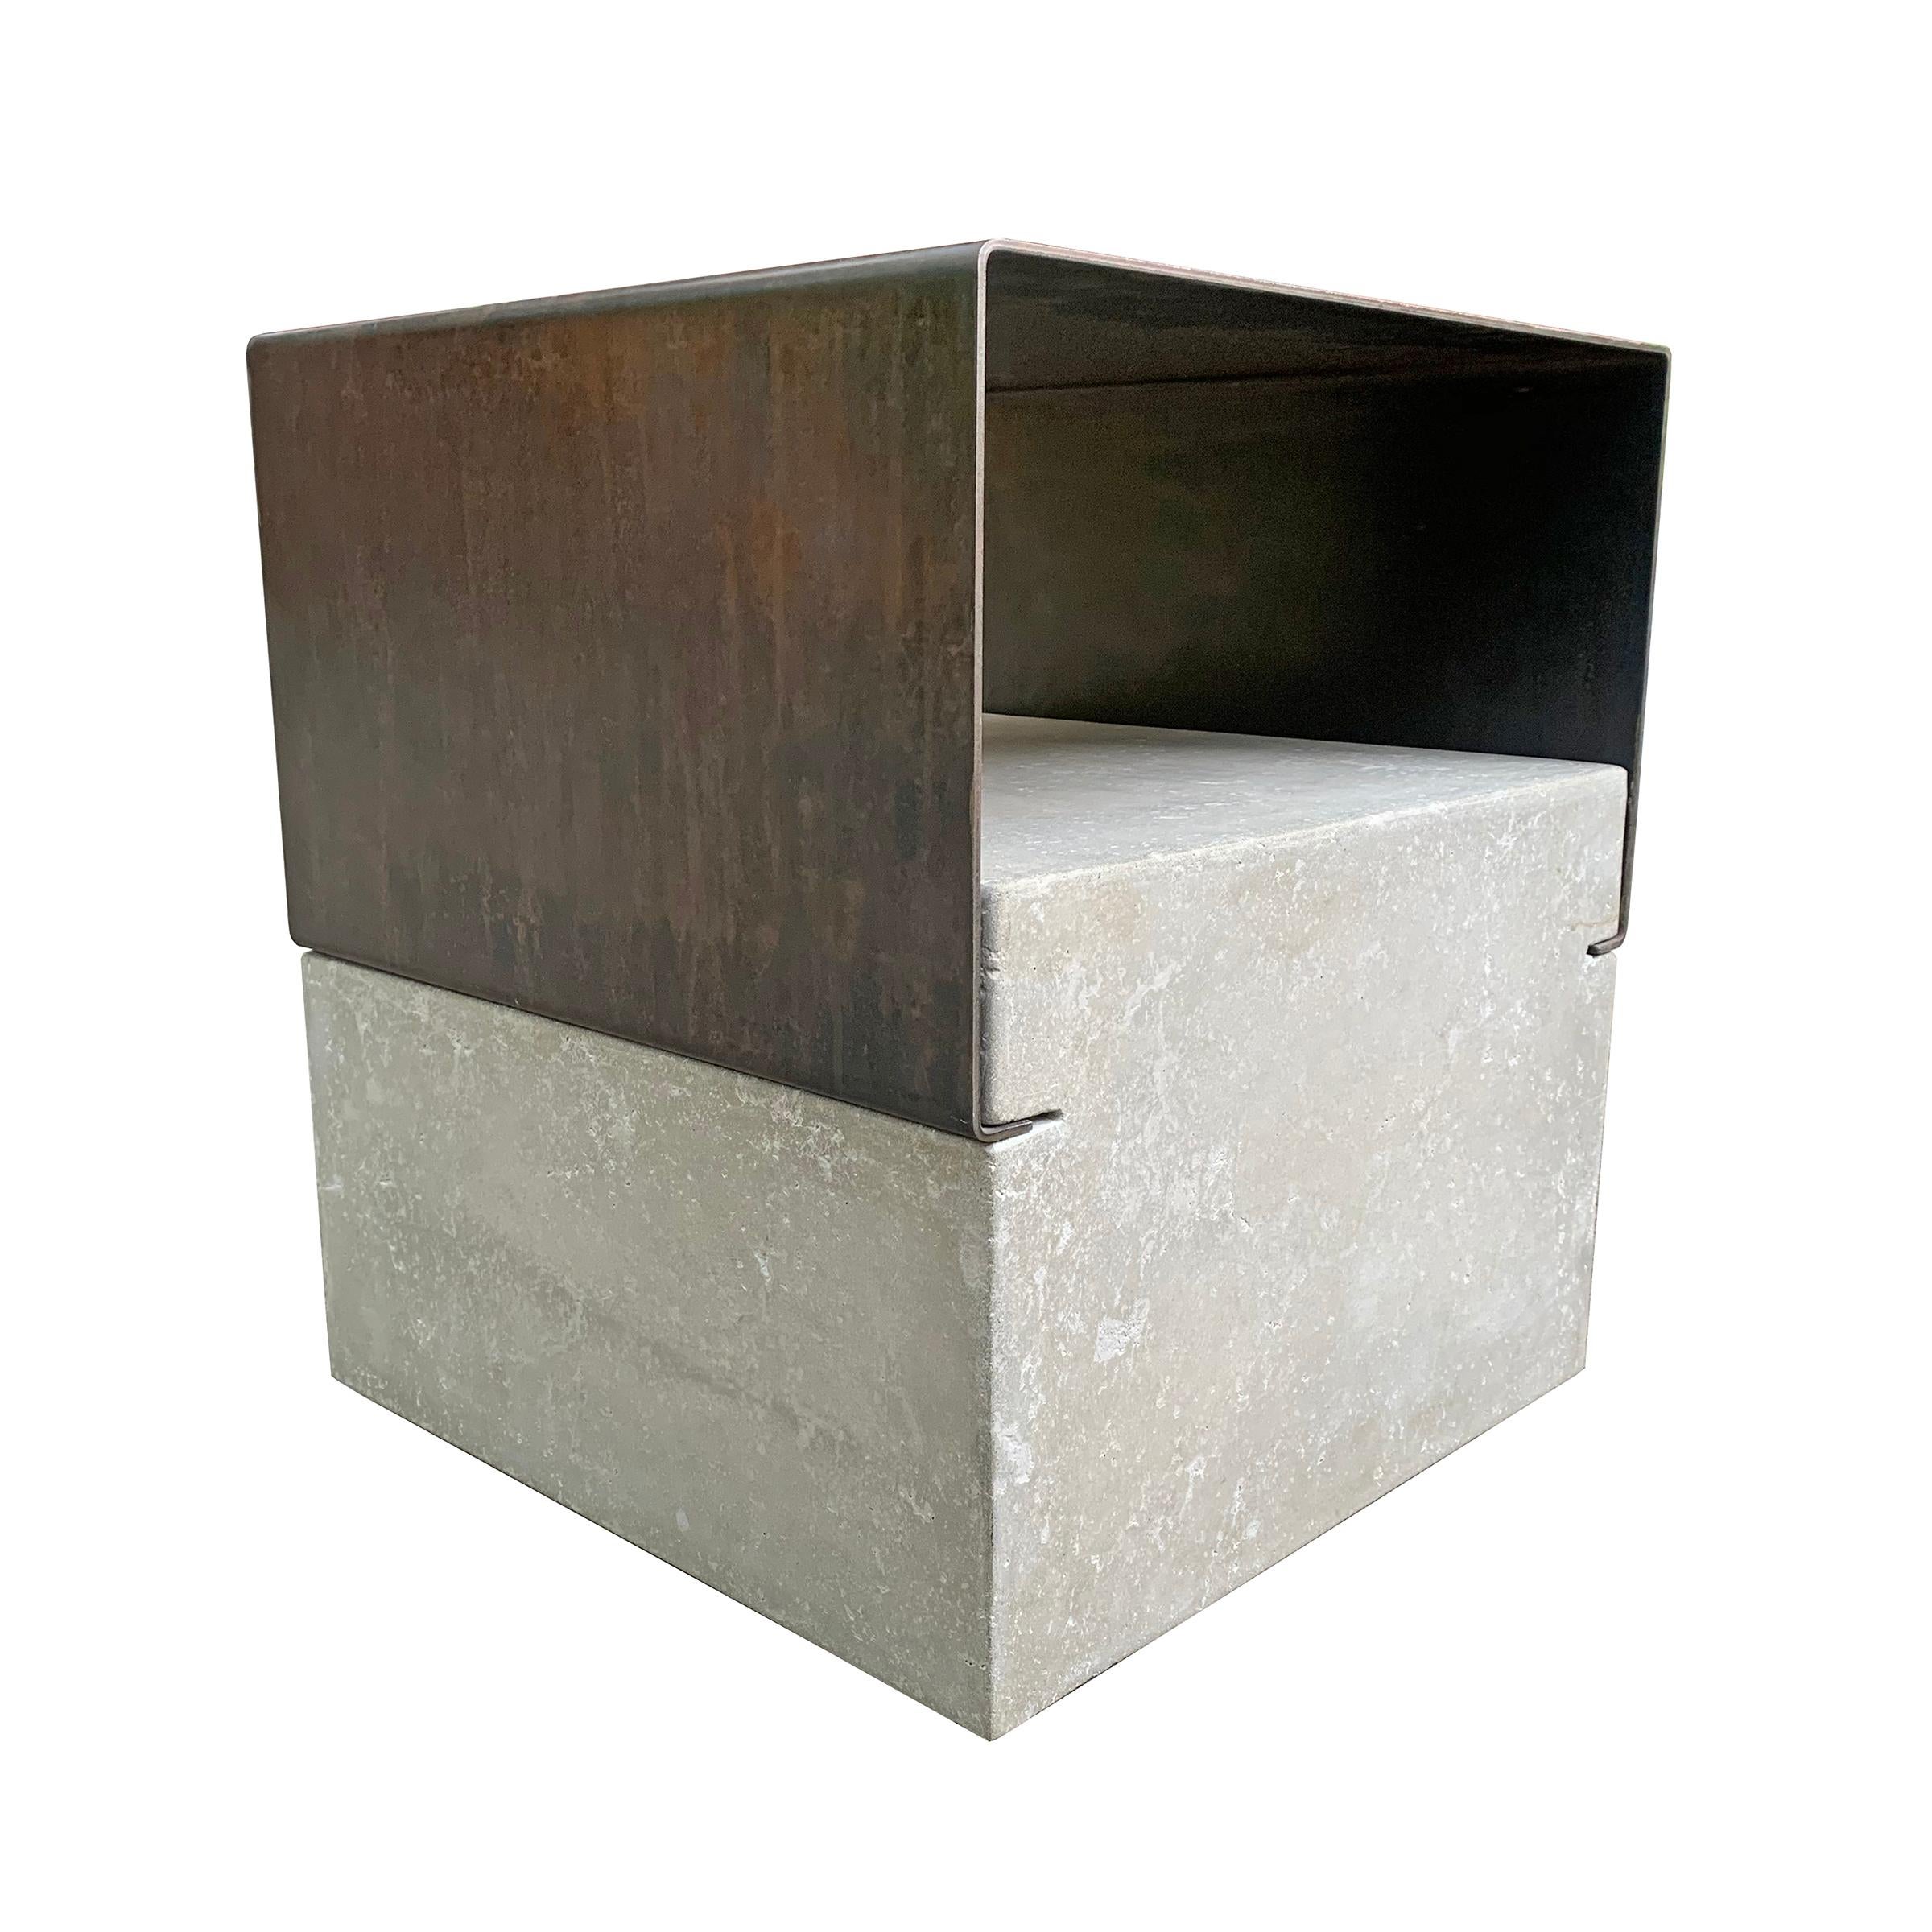 American Modern Steel and Concrete Side Table